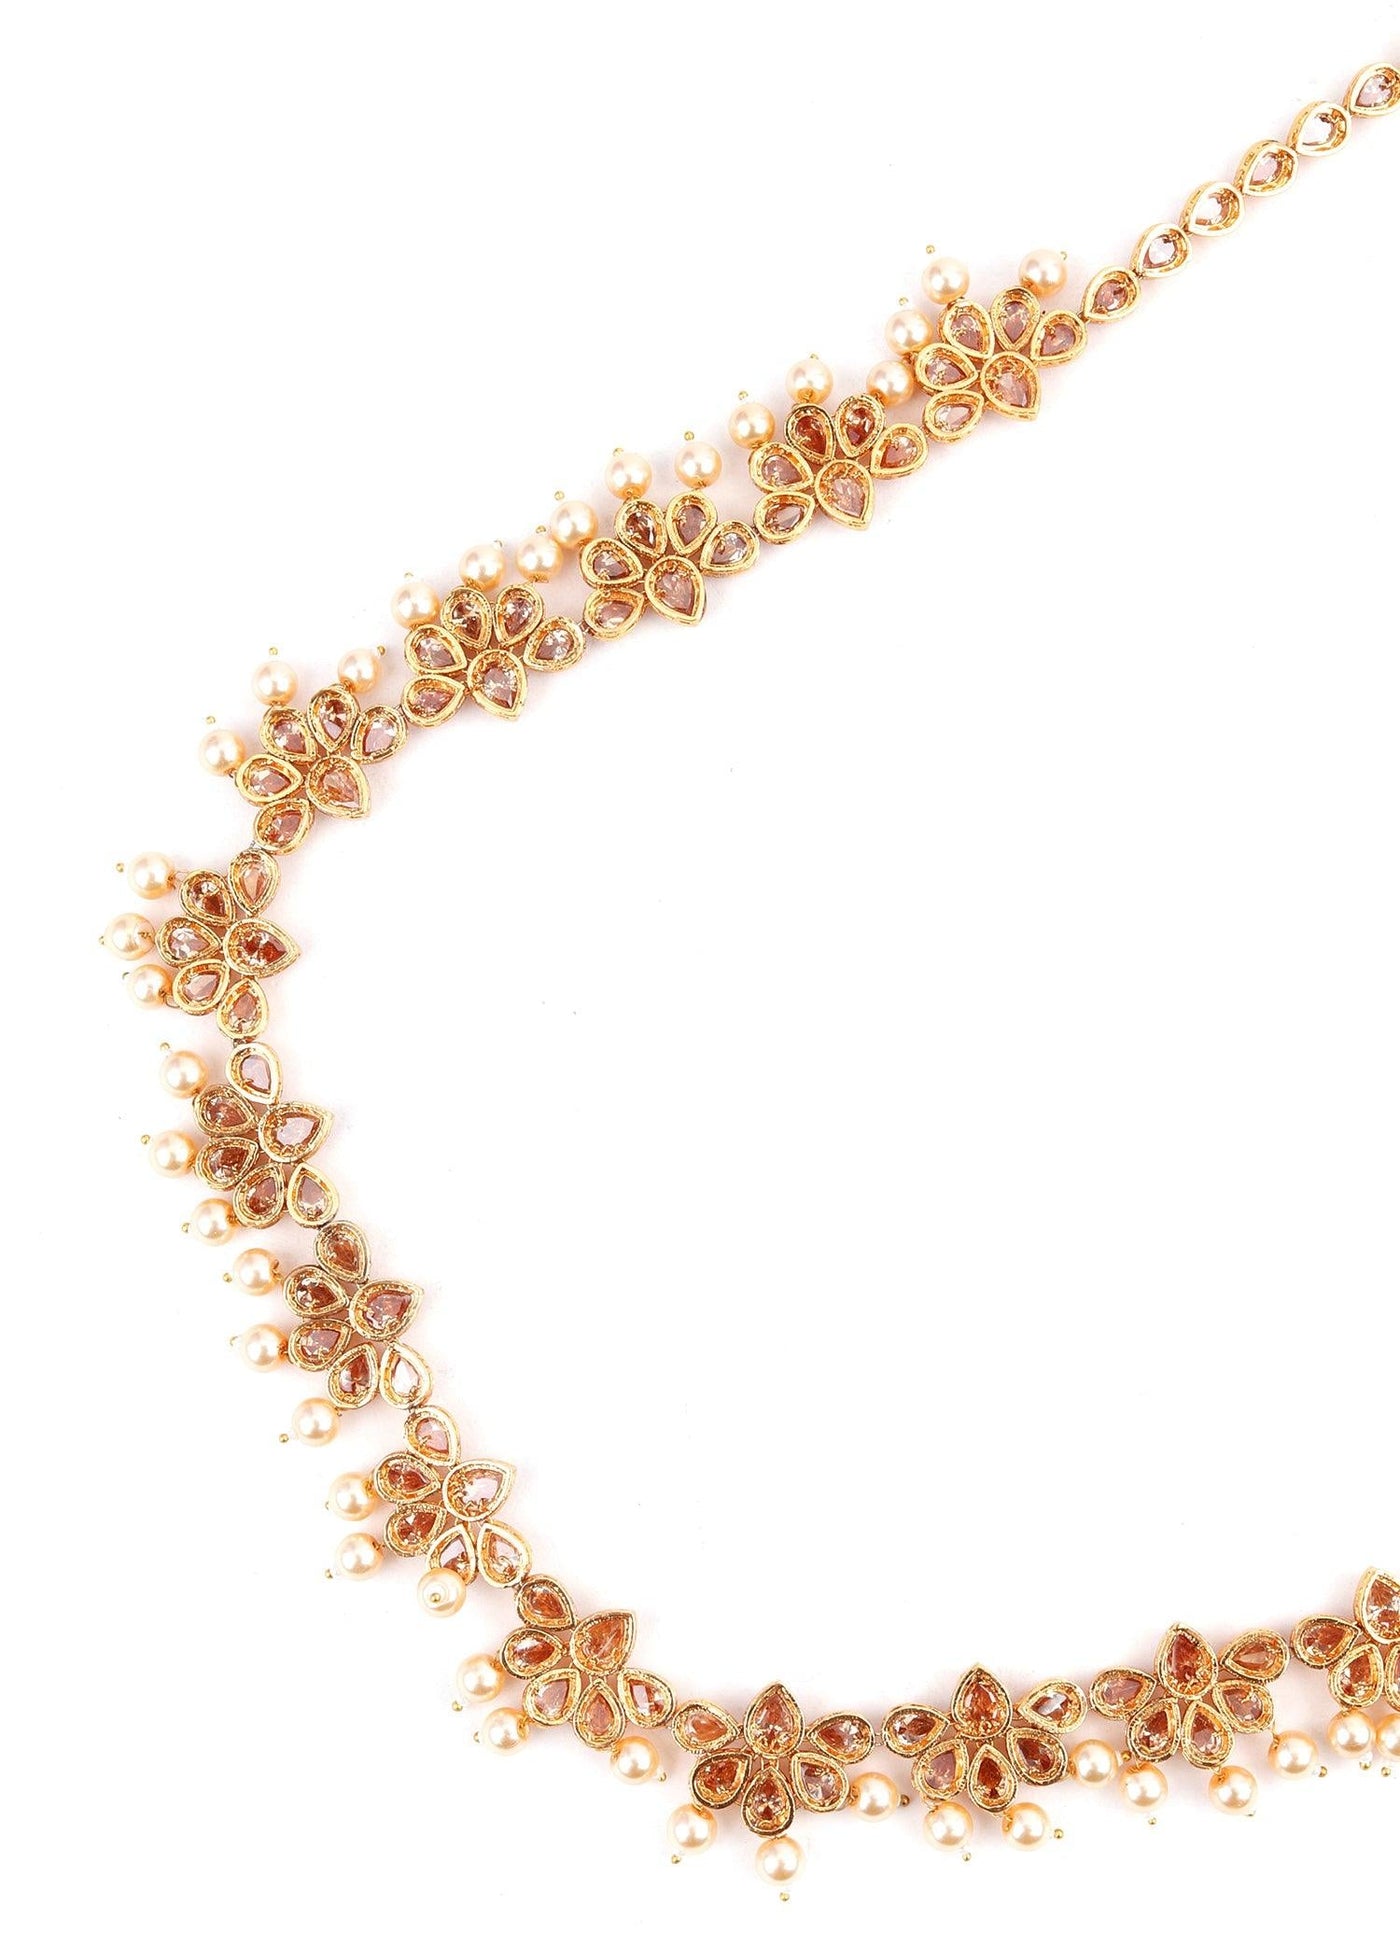 Gold and Pearl Coloured Rhinestone Necklace - Odette